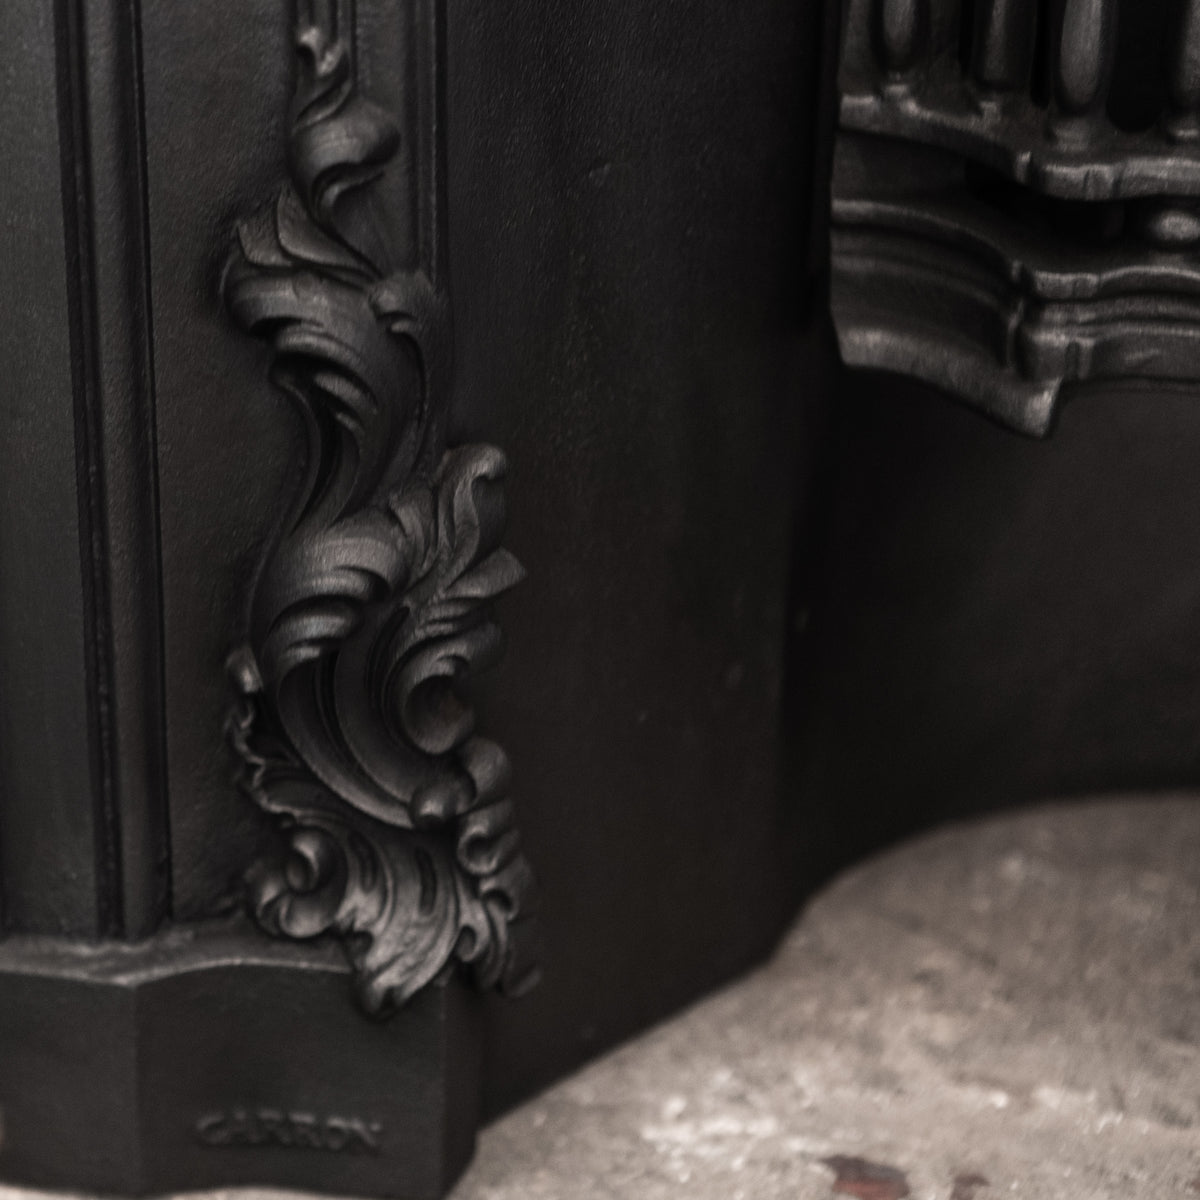 Antique Ornate Cast Iron Fireplace Insert | The Architectural Forum